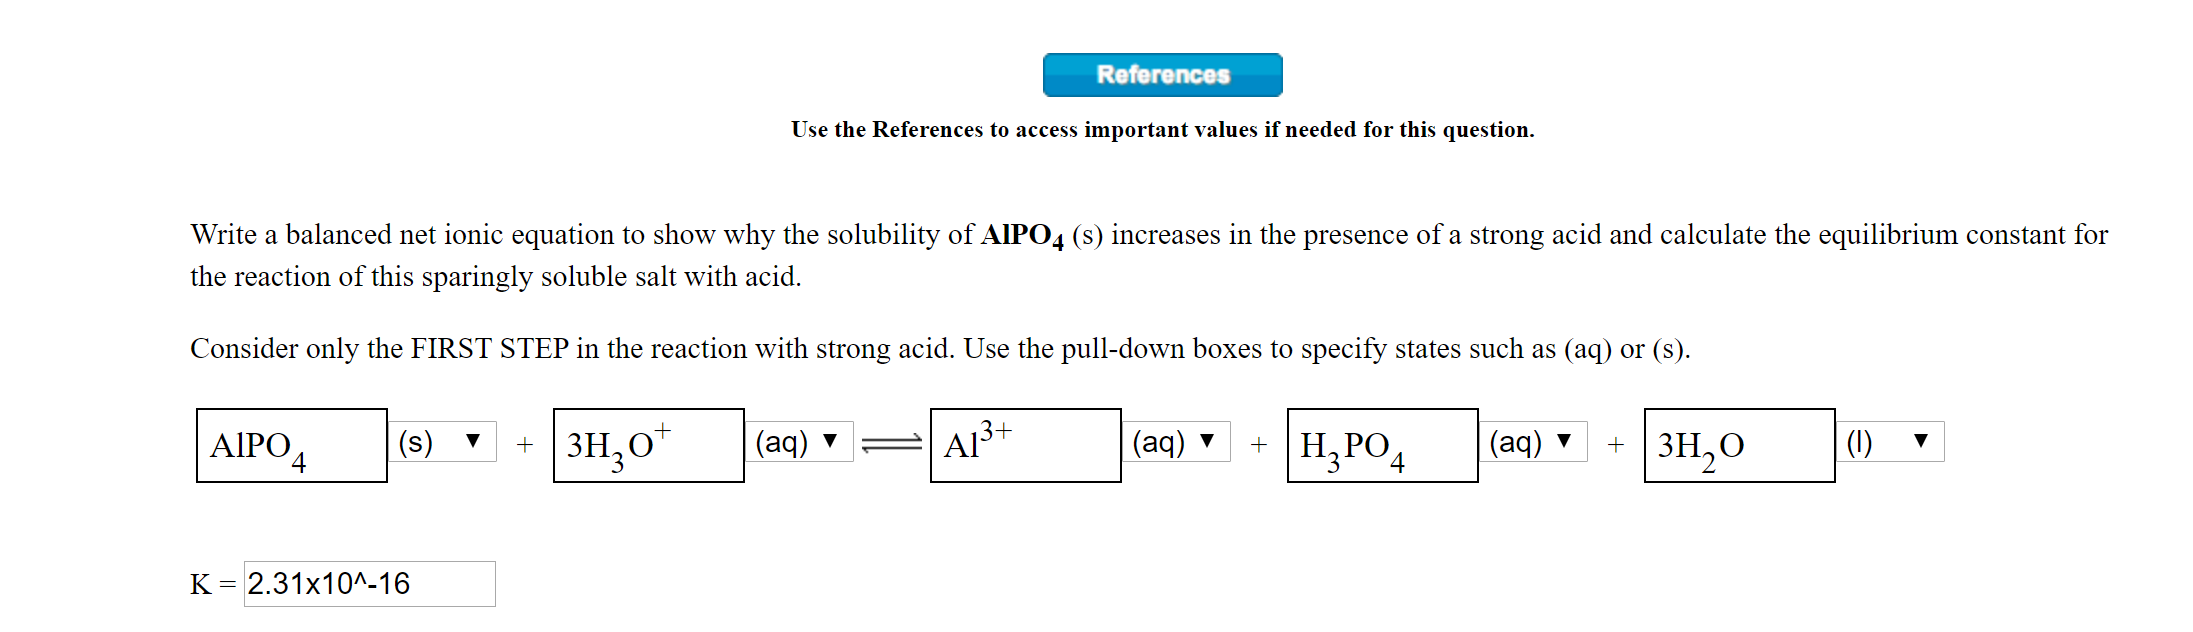 References
Use the References to access important values if needed for this question.
Write a balanced net ionic equation to show why the solubility of AIPO4 (s) increases in the presence of a strong acid and calculate the equilibrium constant for
the reaction of this sparingly soluble salt with acid.
Consider only the FIRST STEP in the reaction with strong acid. Use the pull-down boxes to specify states such as (aq) or (s).
AIPO4
+ | 3H,0"
A13+
|(aq)
+ | зн,0
(s)
(aq)
+ | Н, РО,
(aq) v
(1)
4
к - 2.31х10^-16
